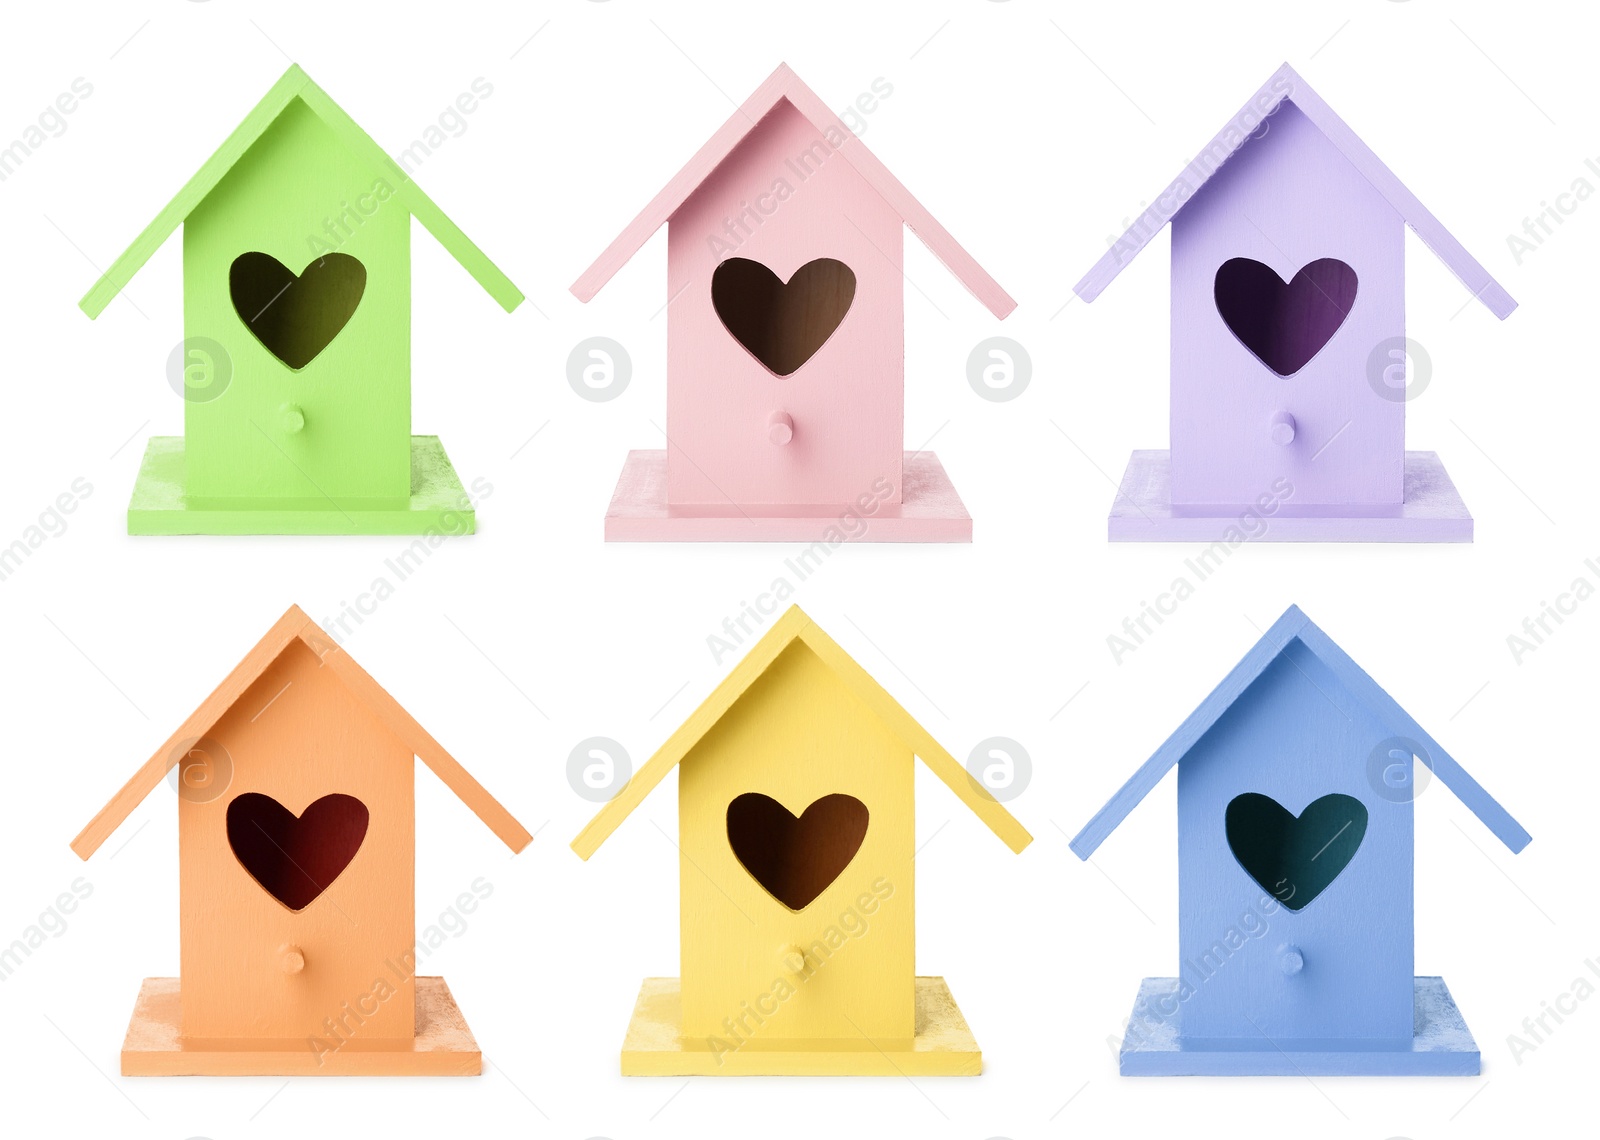 Image of Set with different colorful bird houses on white background 